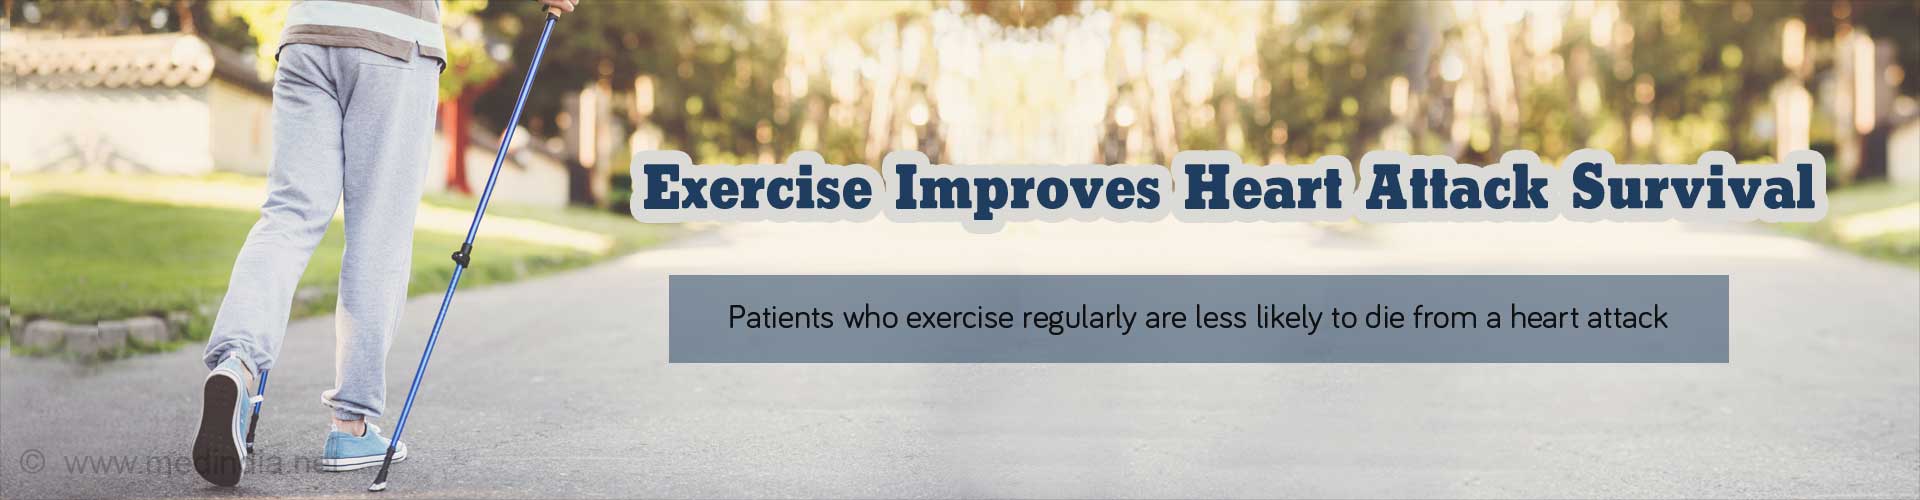 Exercise improves heart attack survival
- Patients who exercise regularly are less likely to die from a heart attack